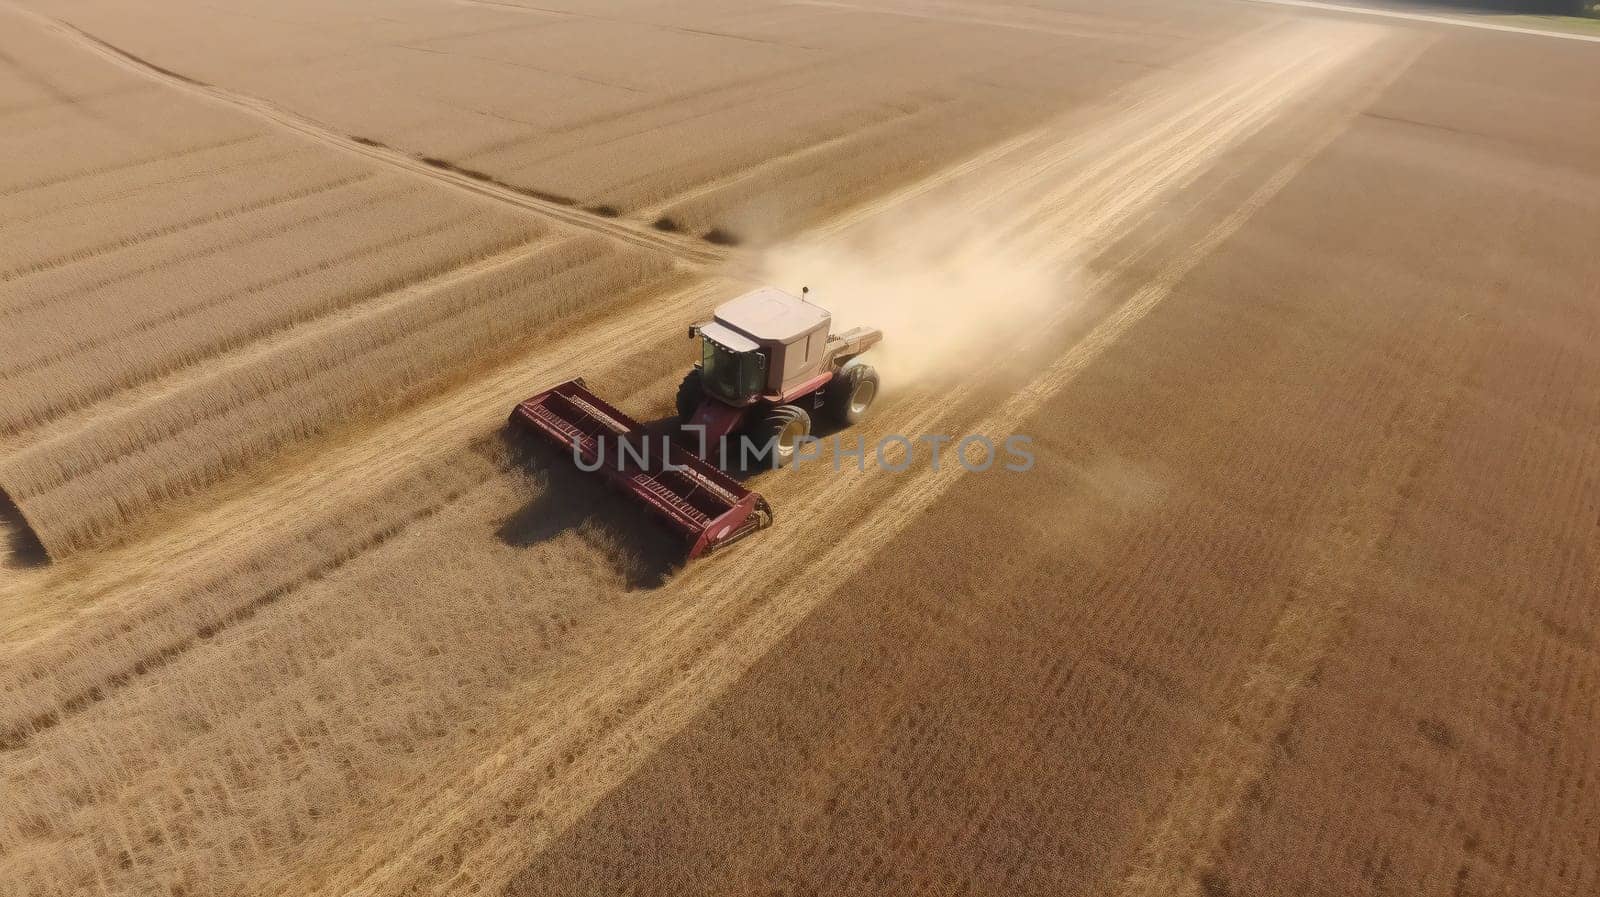 Wheat crop harvest. view of combine harvester at work during harvest time. Agriculture banner. copy space